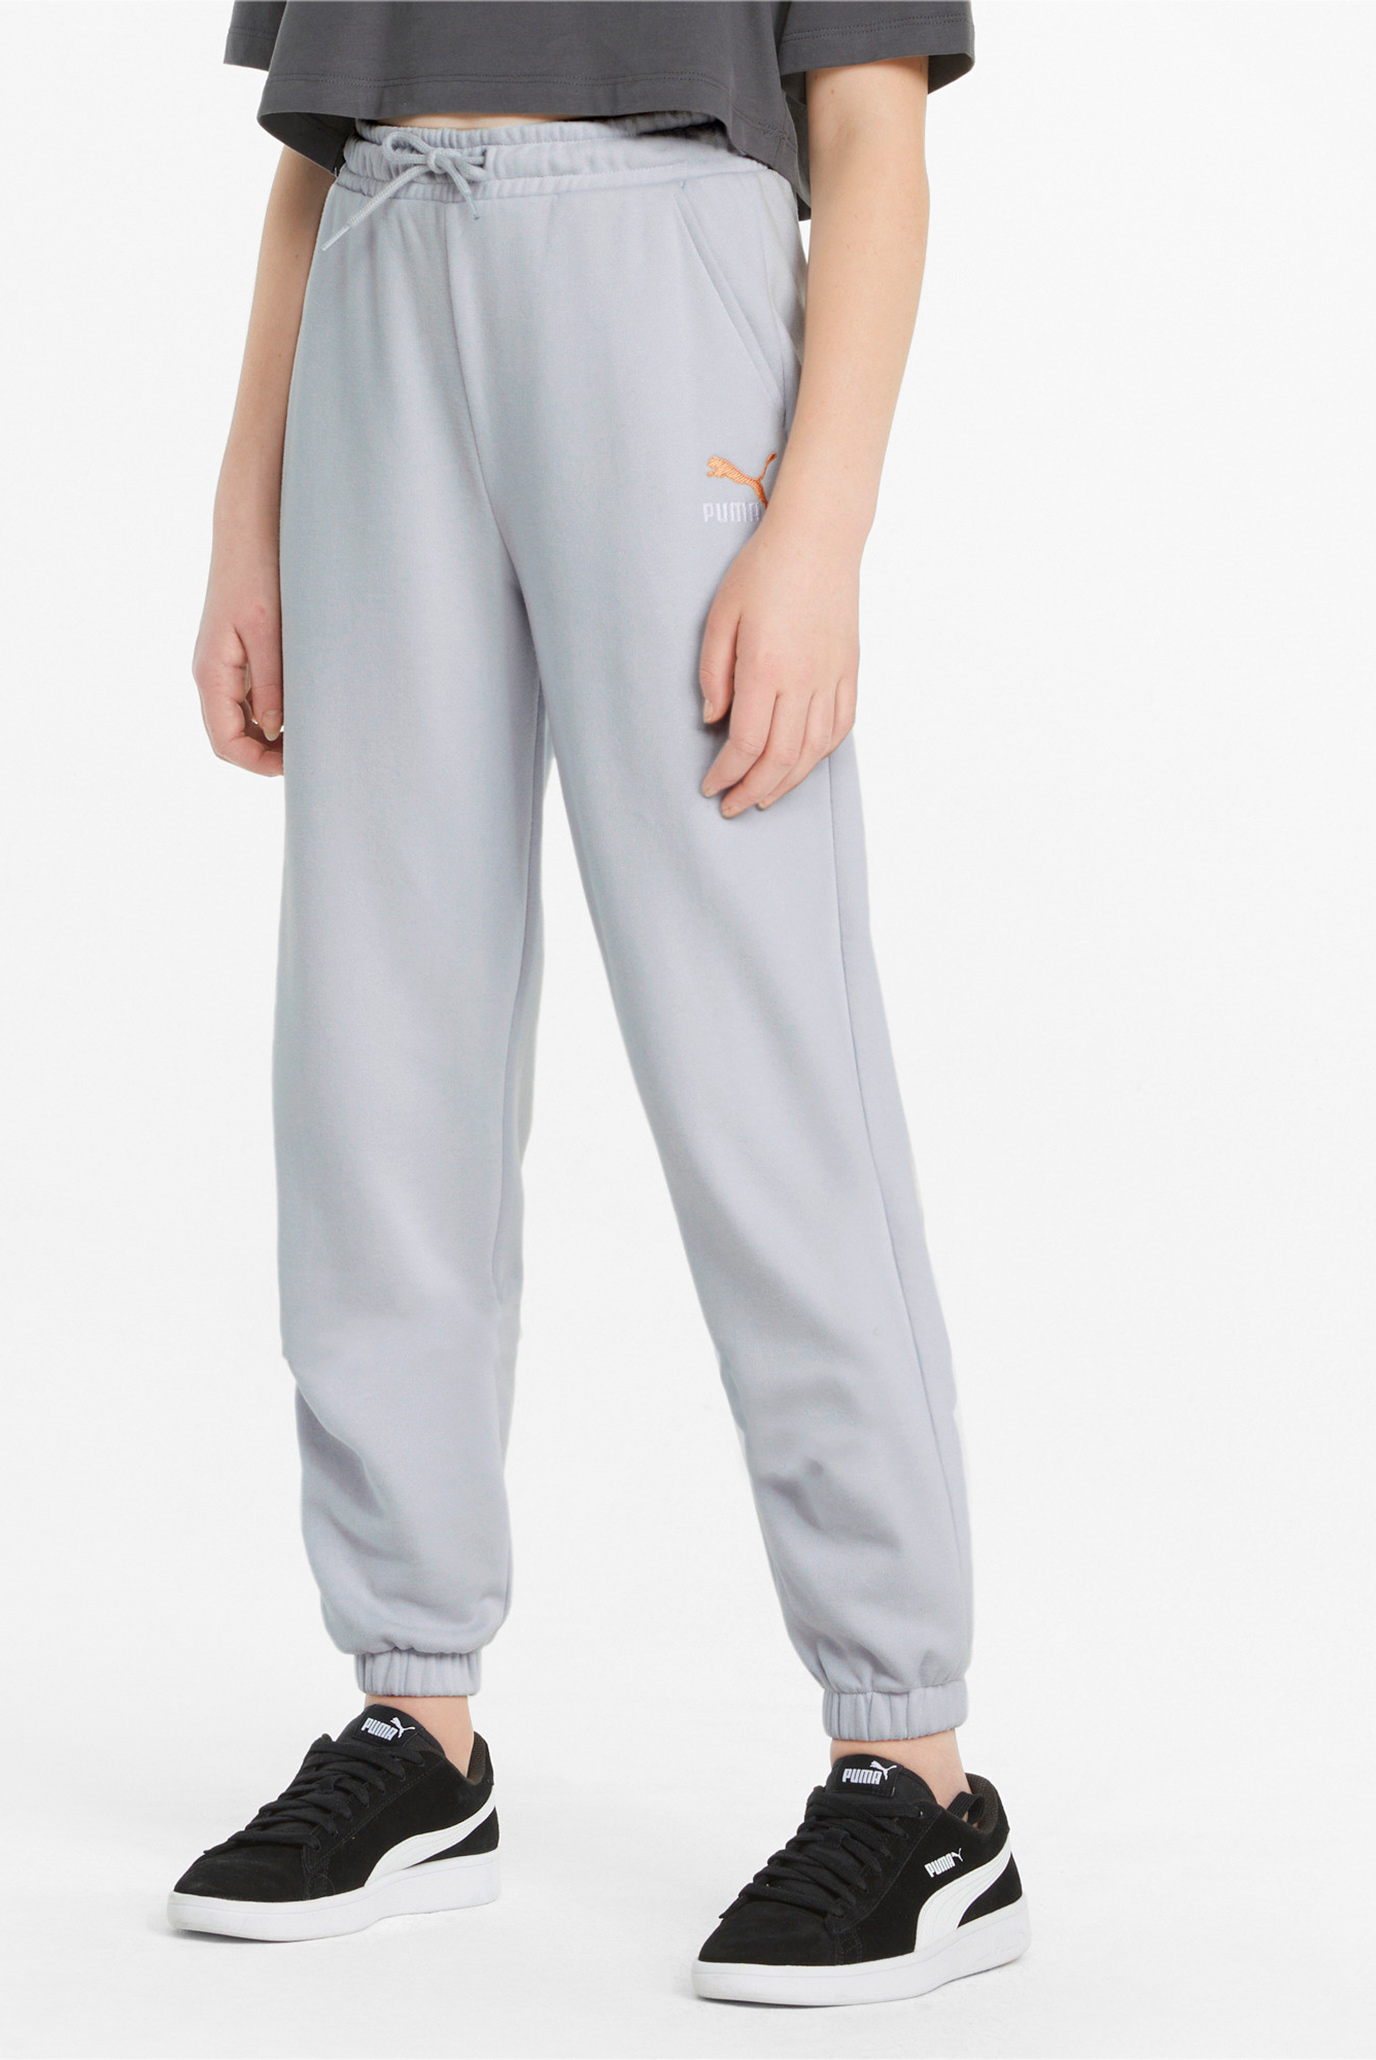 Детские штаны GRL Relaxed Fit Youth Sweatpants 1